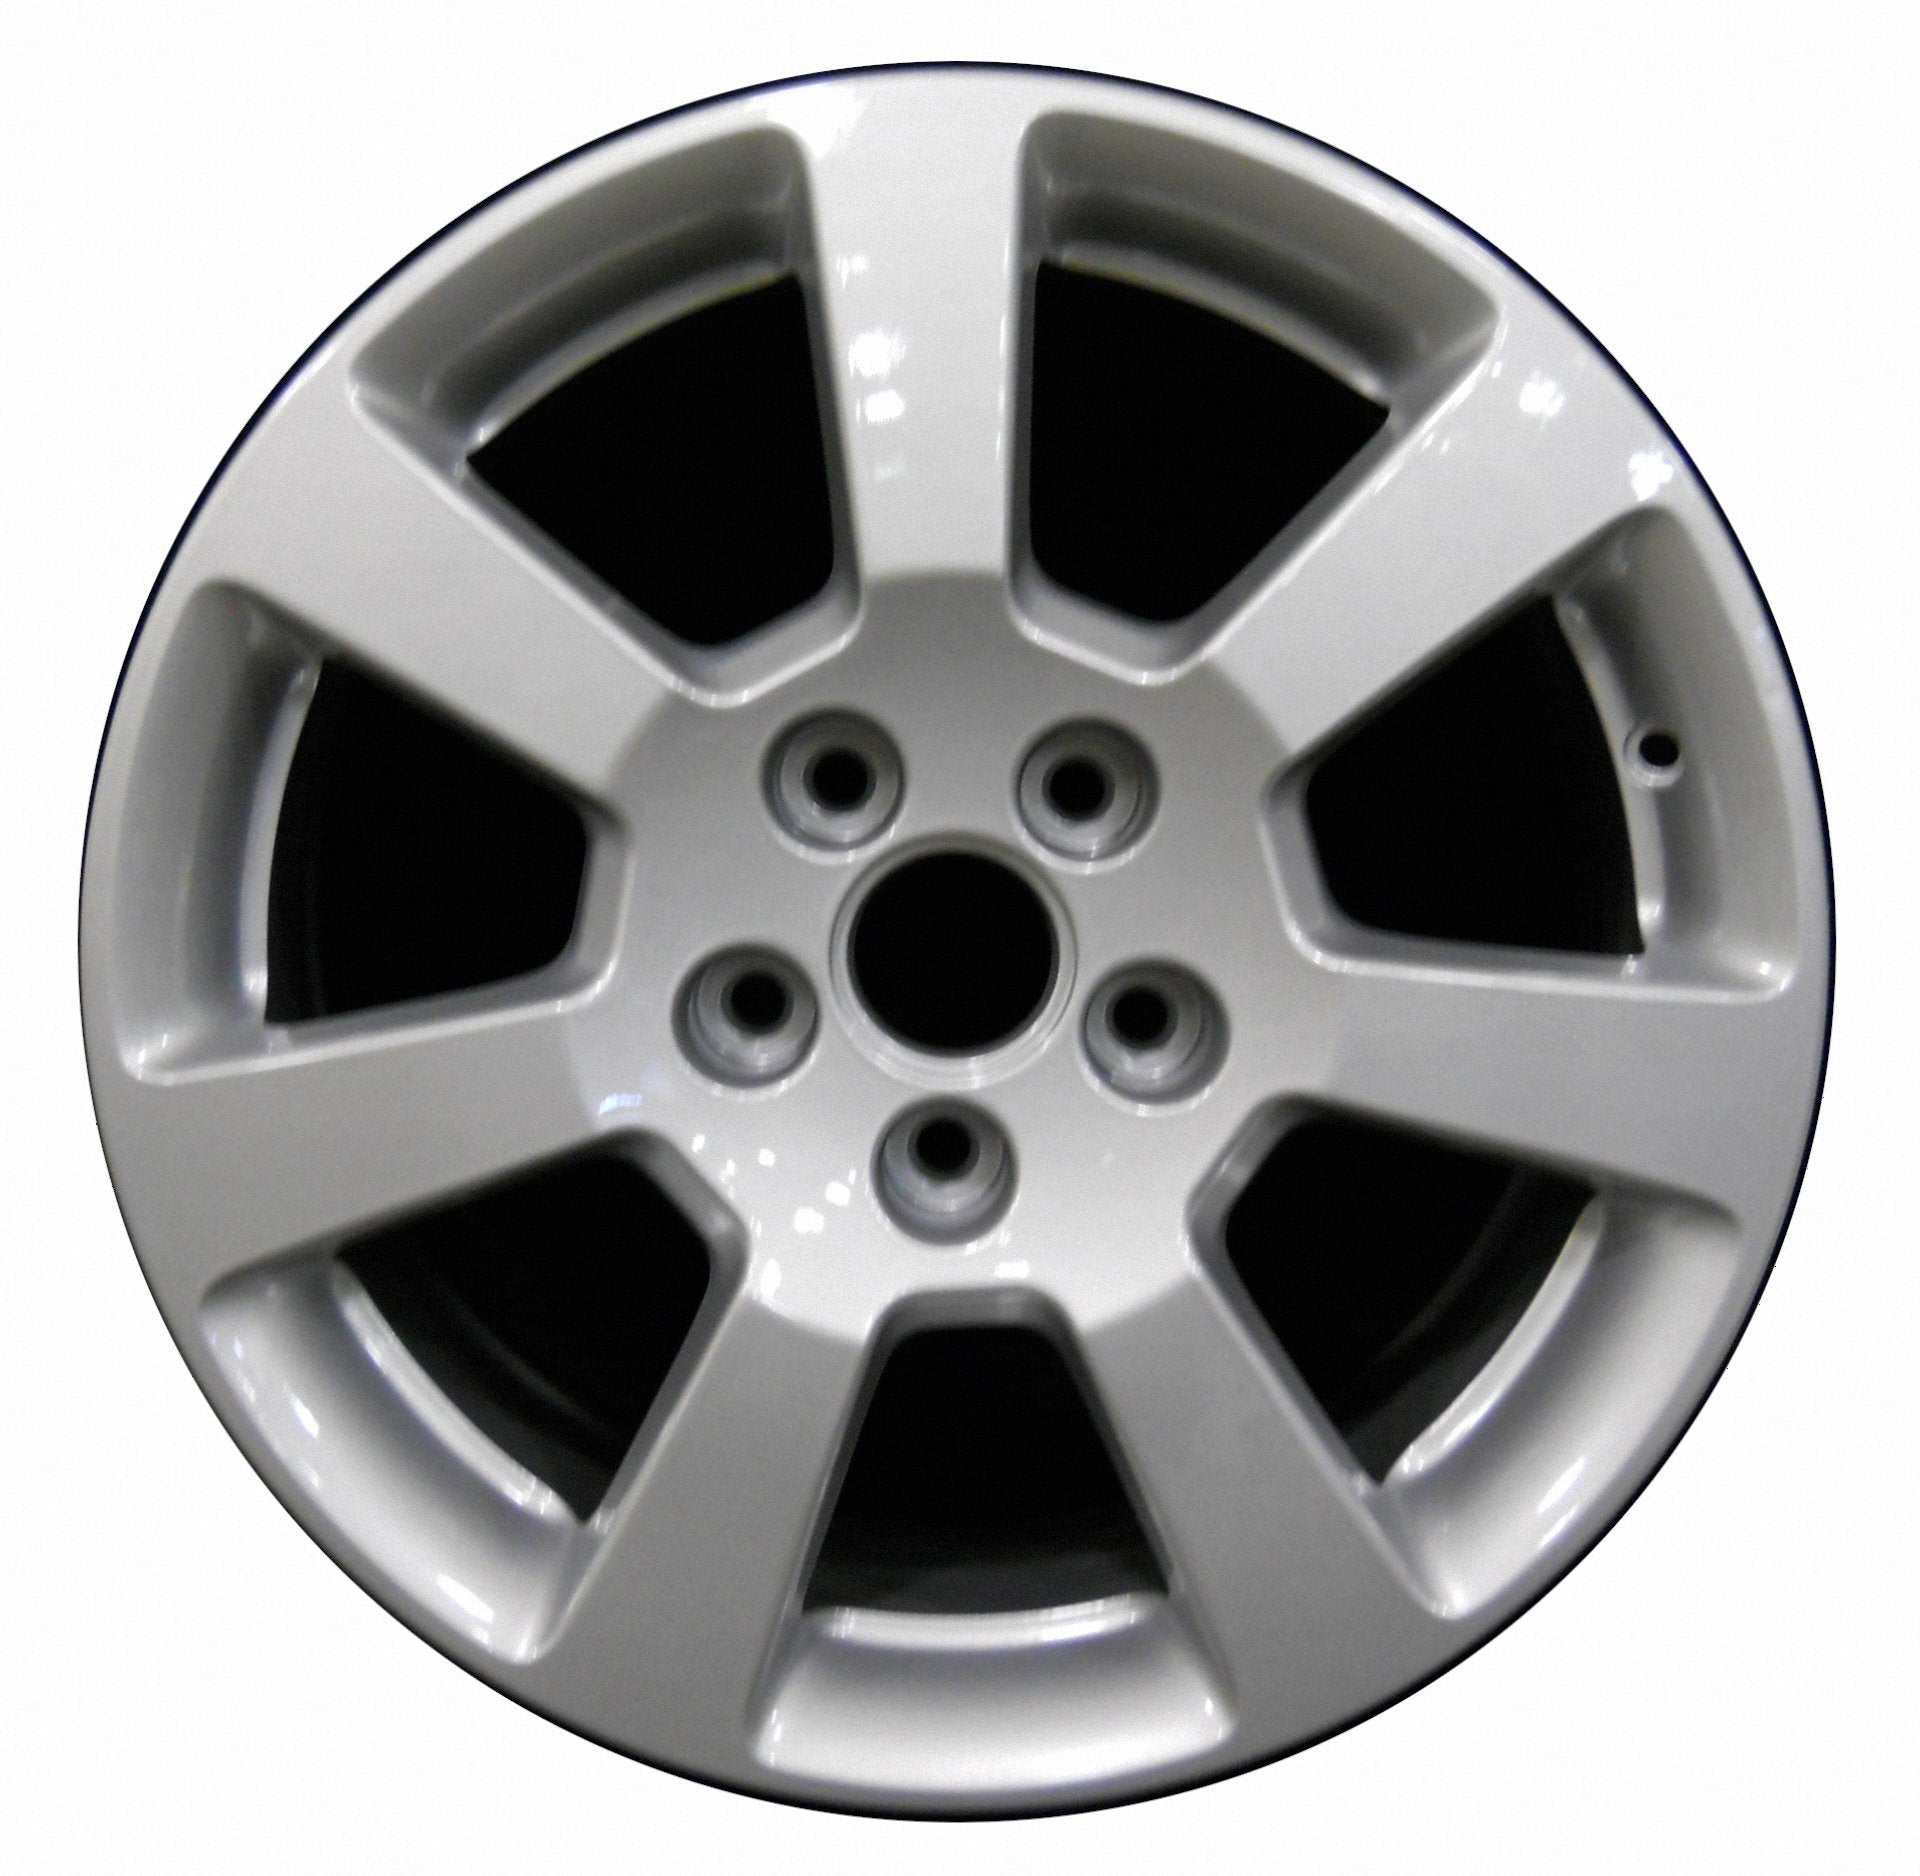 Cadillac CTS  2006, 2007 Factory OEM Car Wheel Size 17x7.5 Alloy WAO.4586.PS06.FF